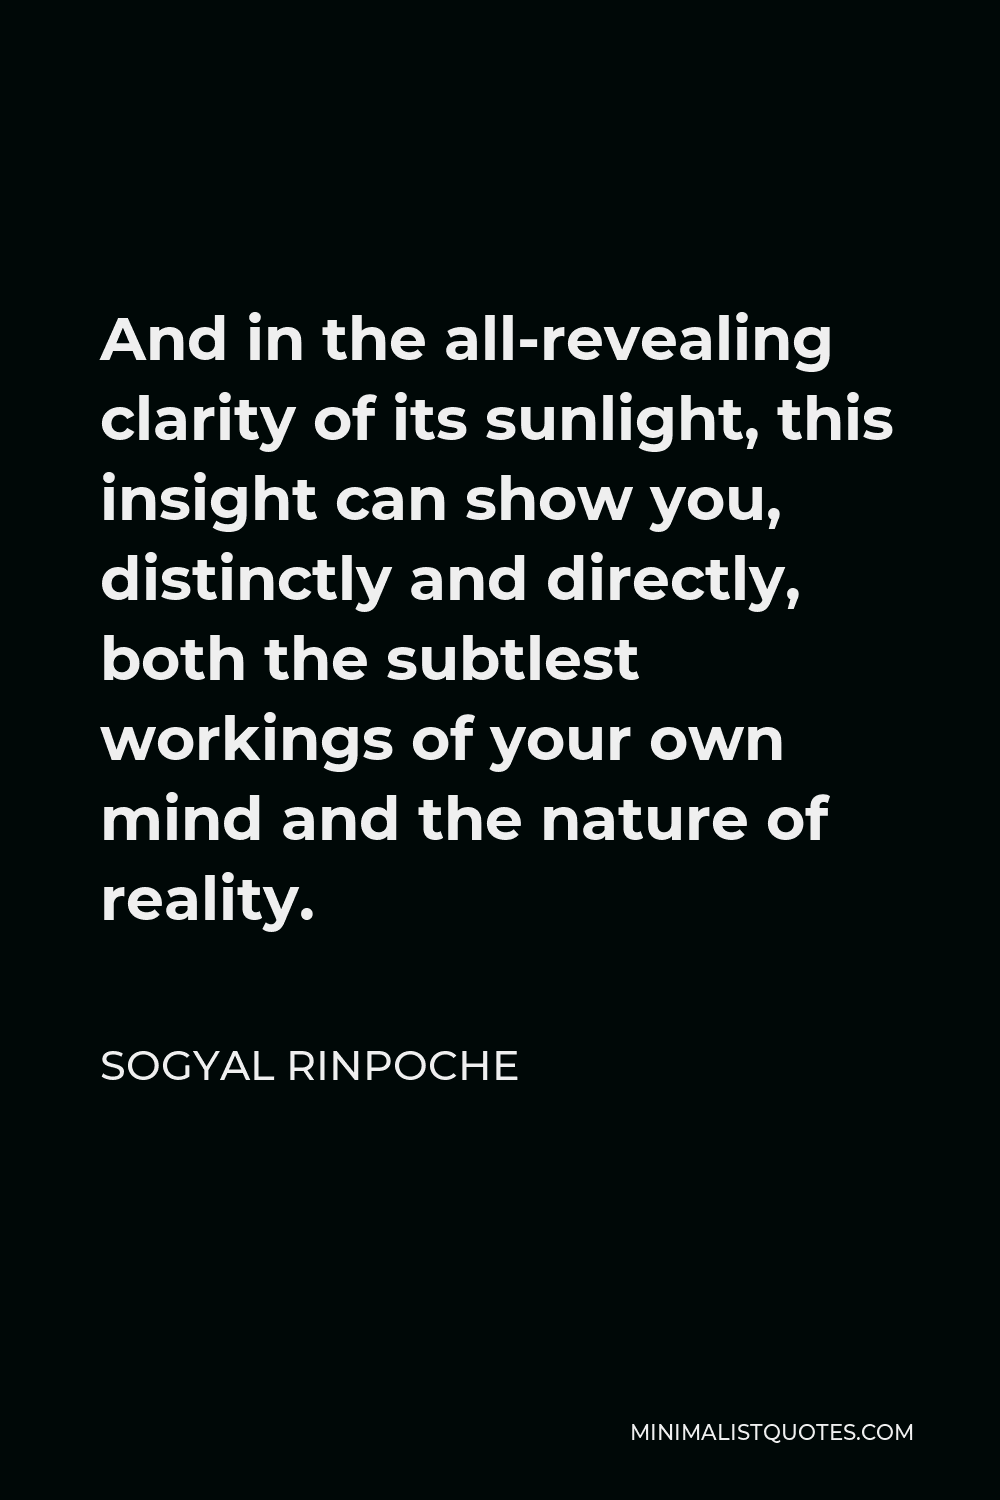 Sogyal Rinpoche Quote - And in the all-revealing clarity of its sunlight, this insight can show you, distinctly and directly, both the subtlest workings of your own mind and the nature of reality.